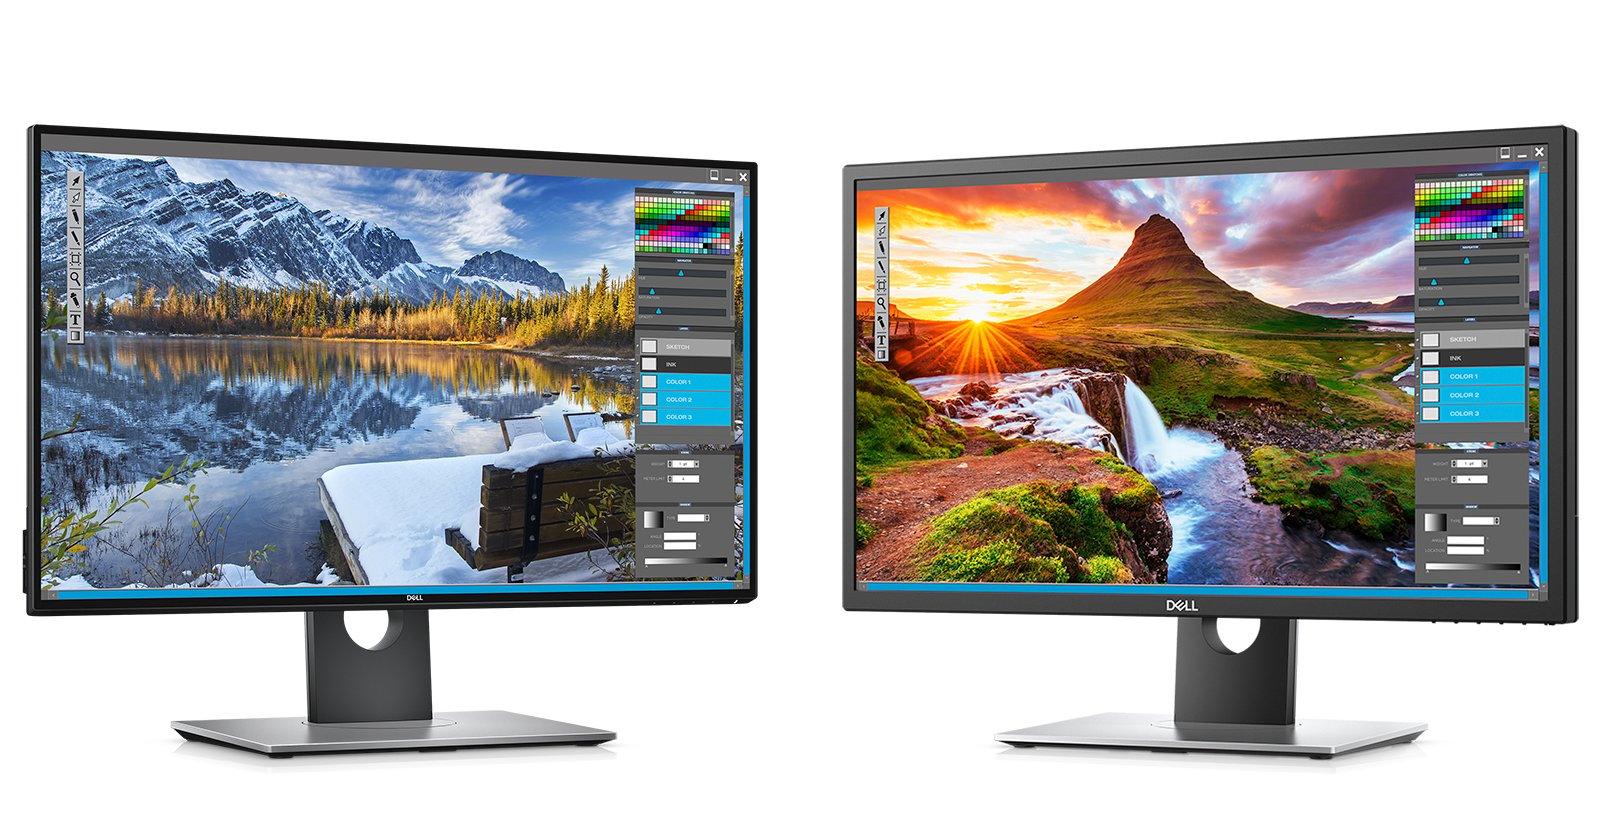 Africa feed Less than Dell Drops Its First HDR Monitor: A 27-inch 4K Display with 100% Adobe RGB  | PetaPixel